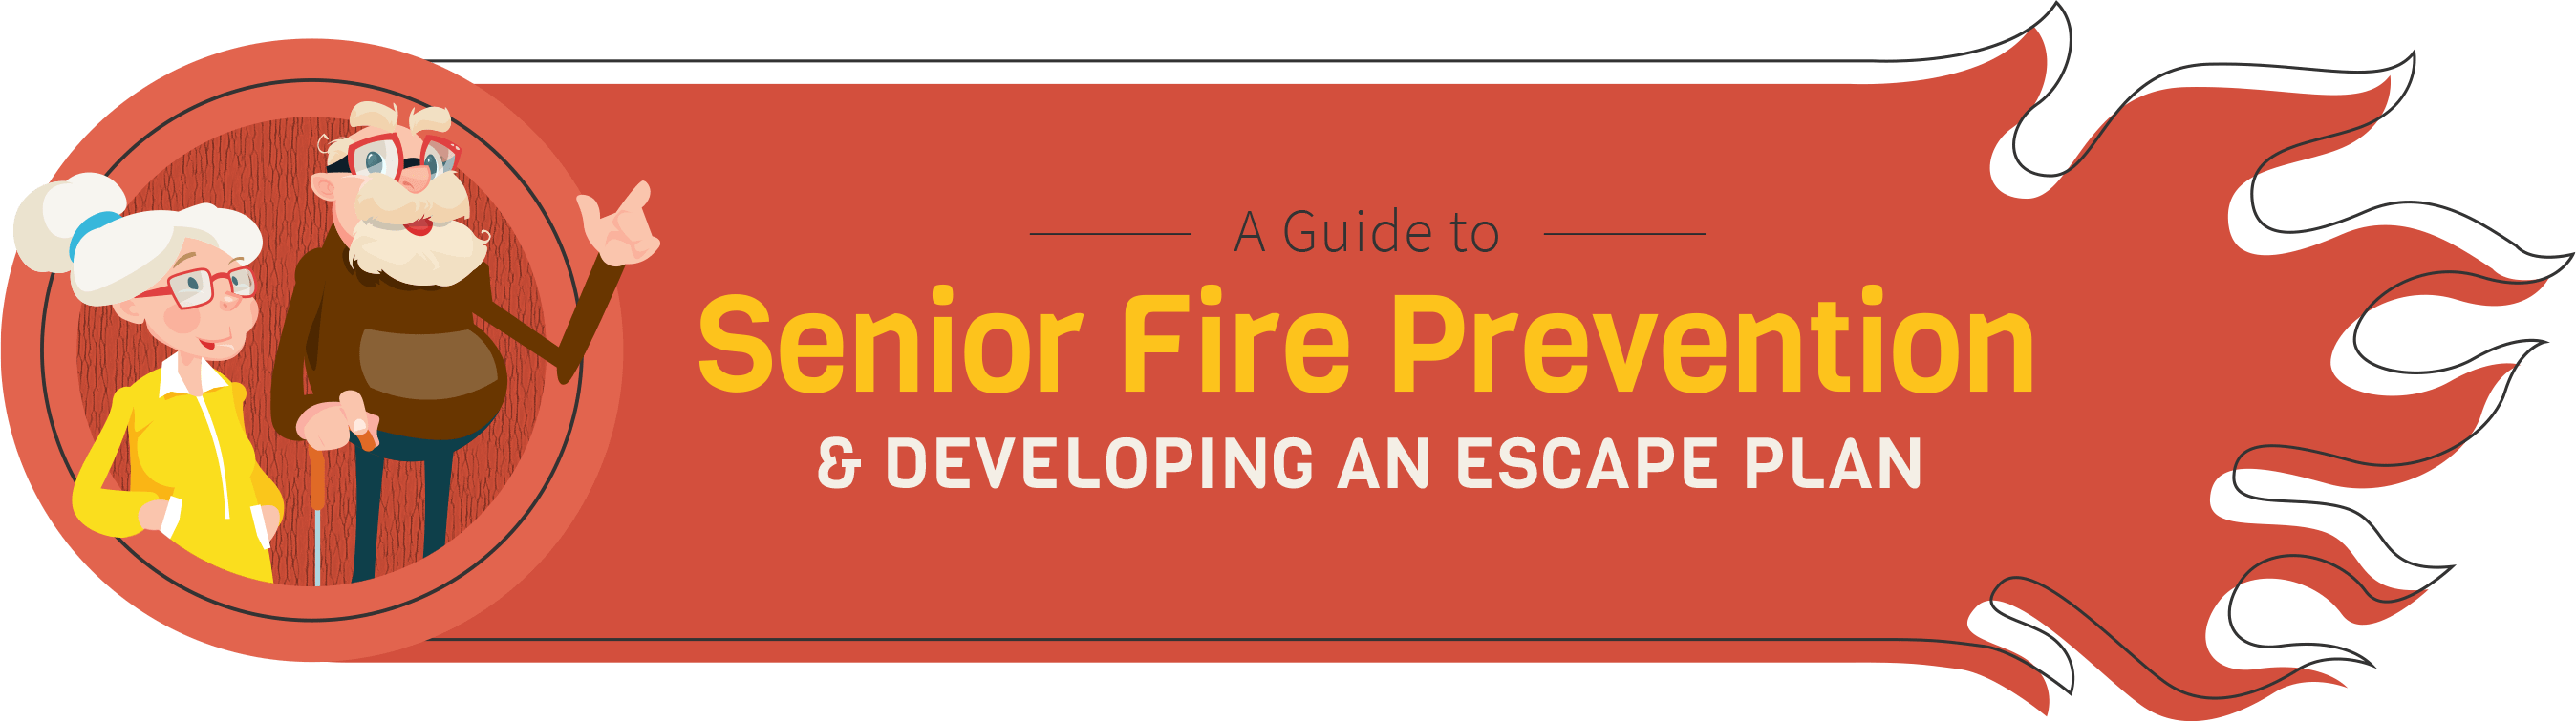 A Guide to Senior Fire Prevention & Developing and Escape Plan